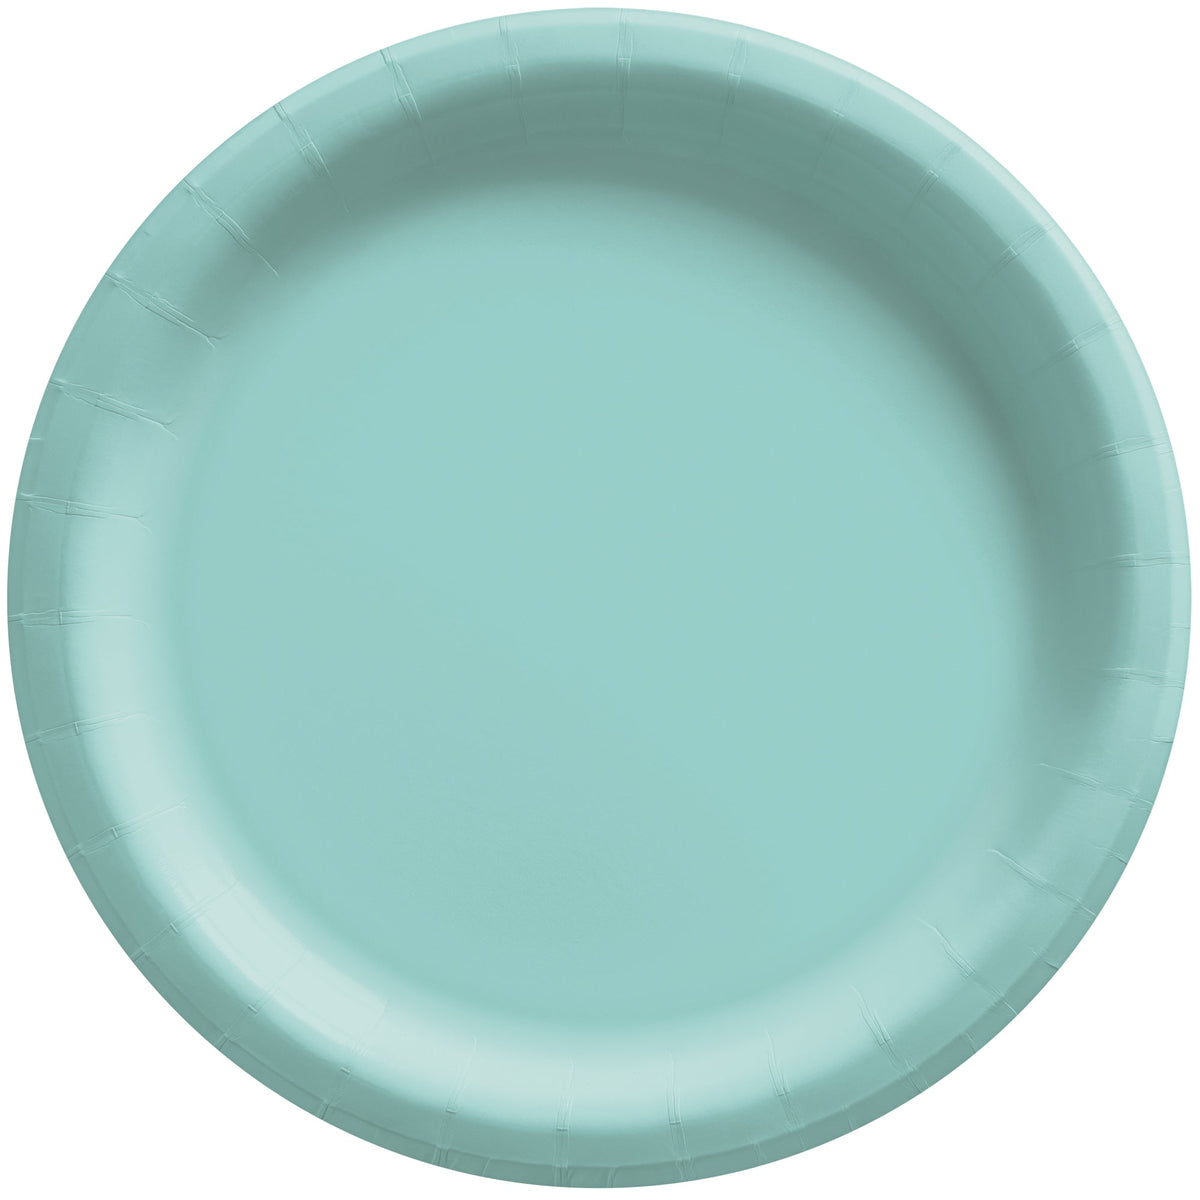 Robins-Egg Blue 8 1/2" Round Paper Plates 50 count